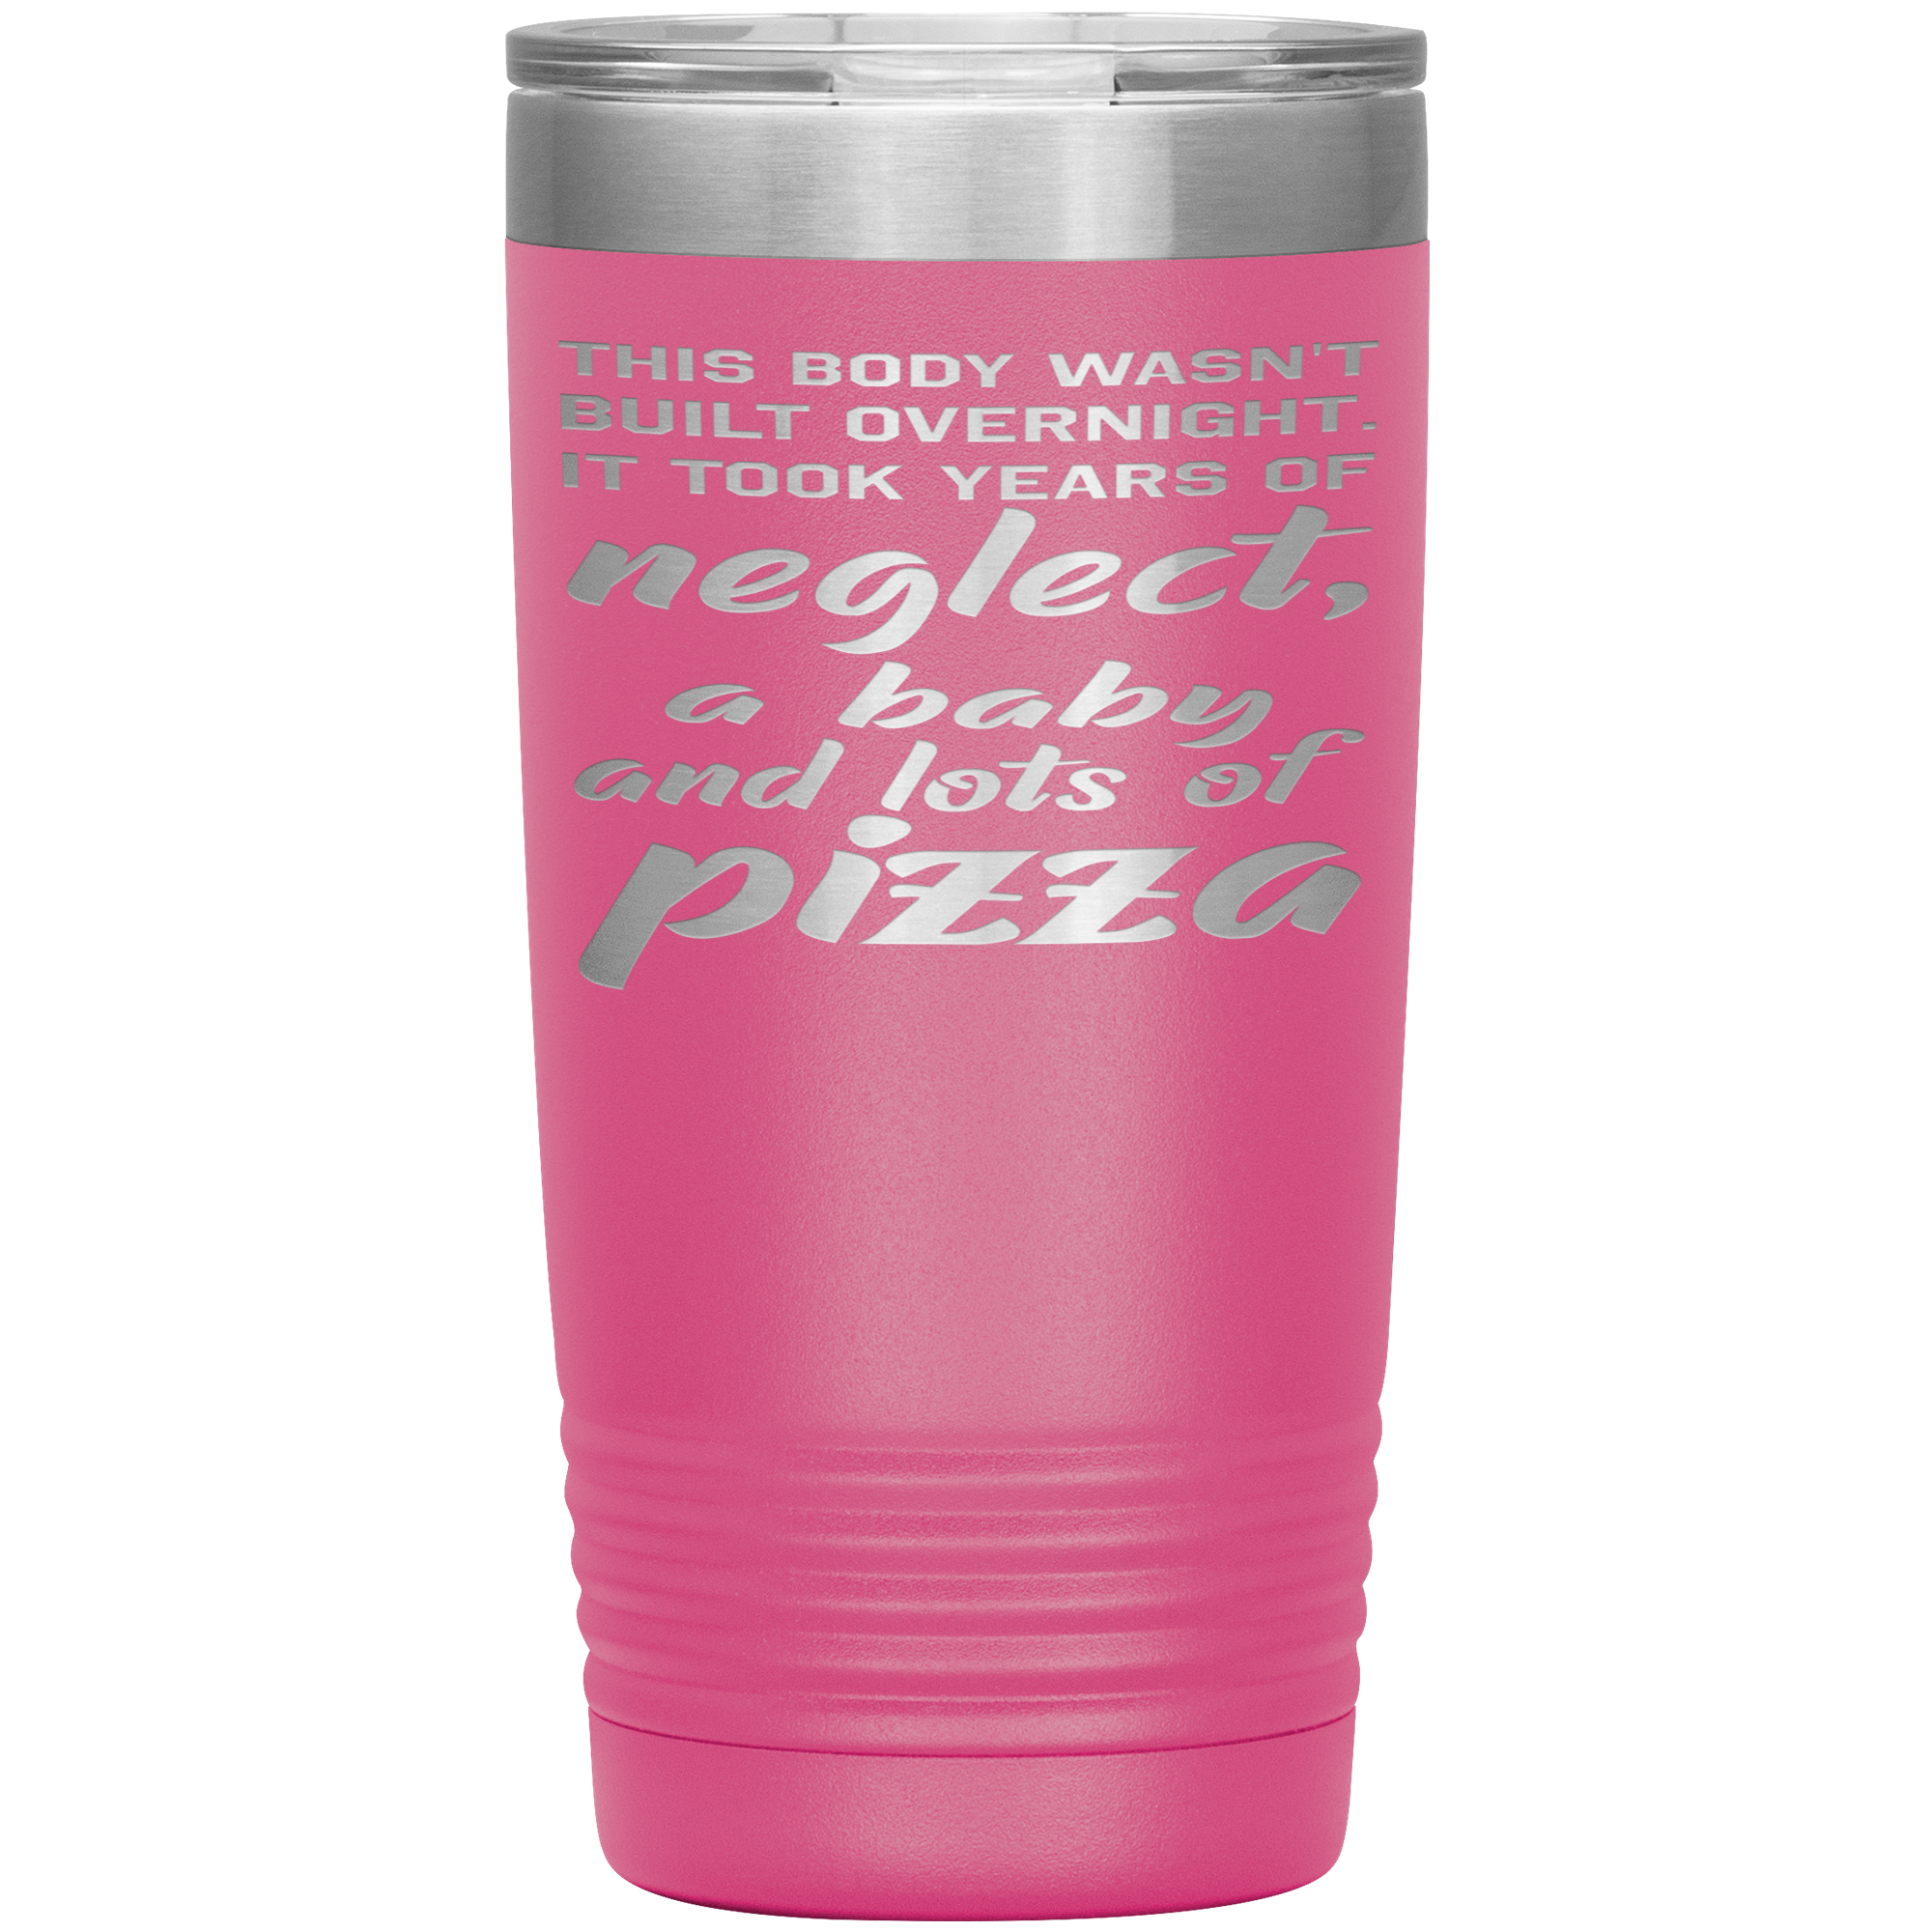 " A BABY AND  LOTS OF PIZZA " TUMBLER